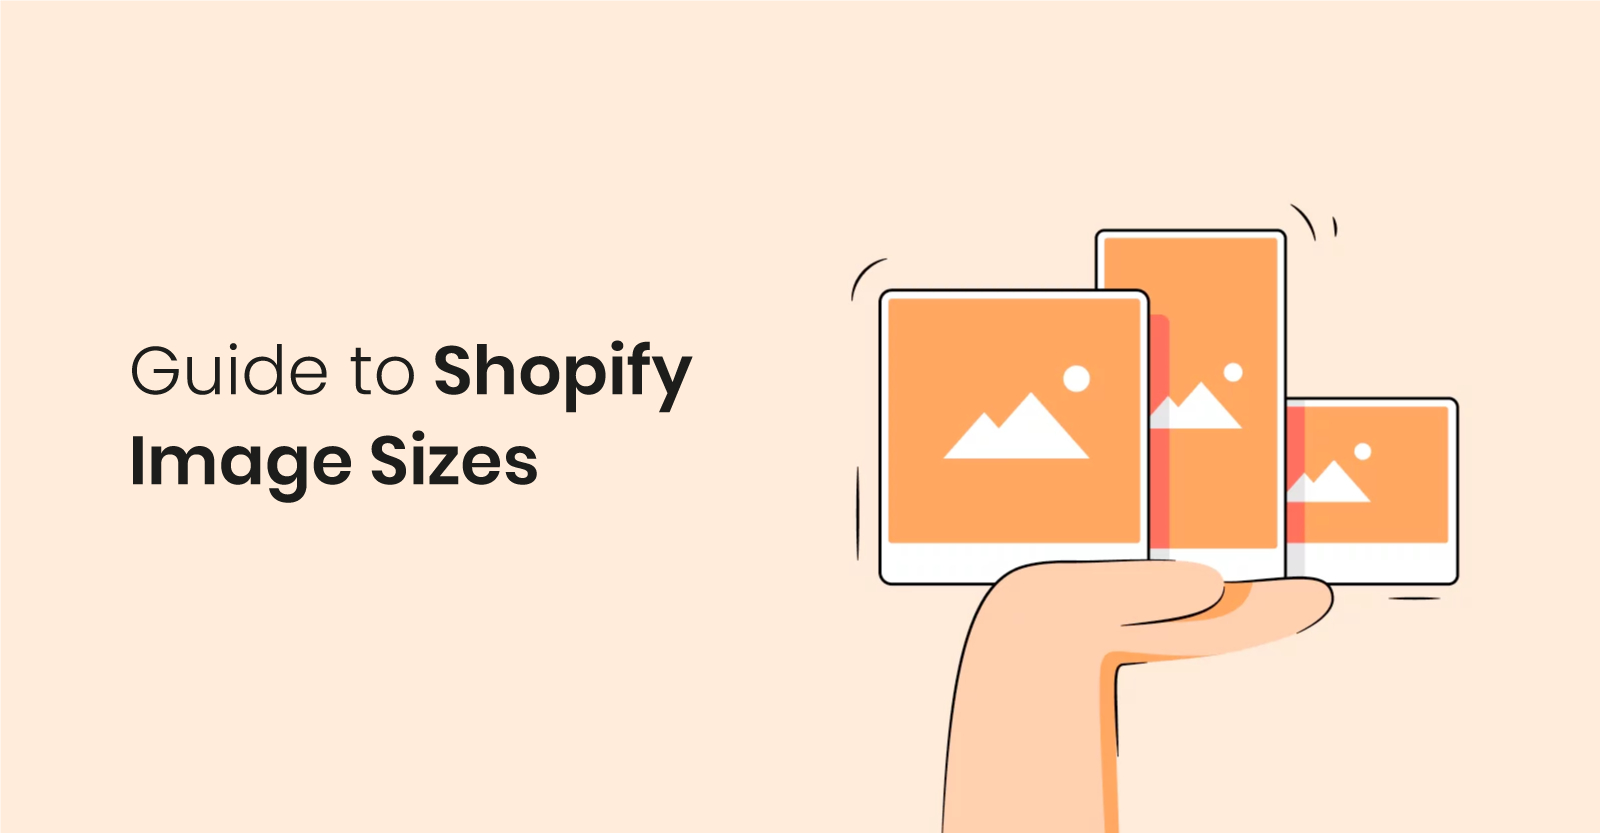 Guide to Shopify Image Sizes 2022